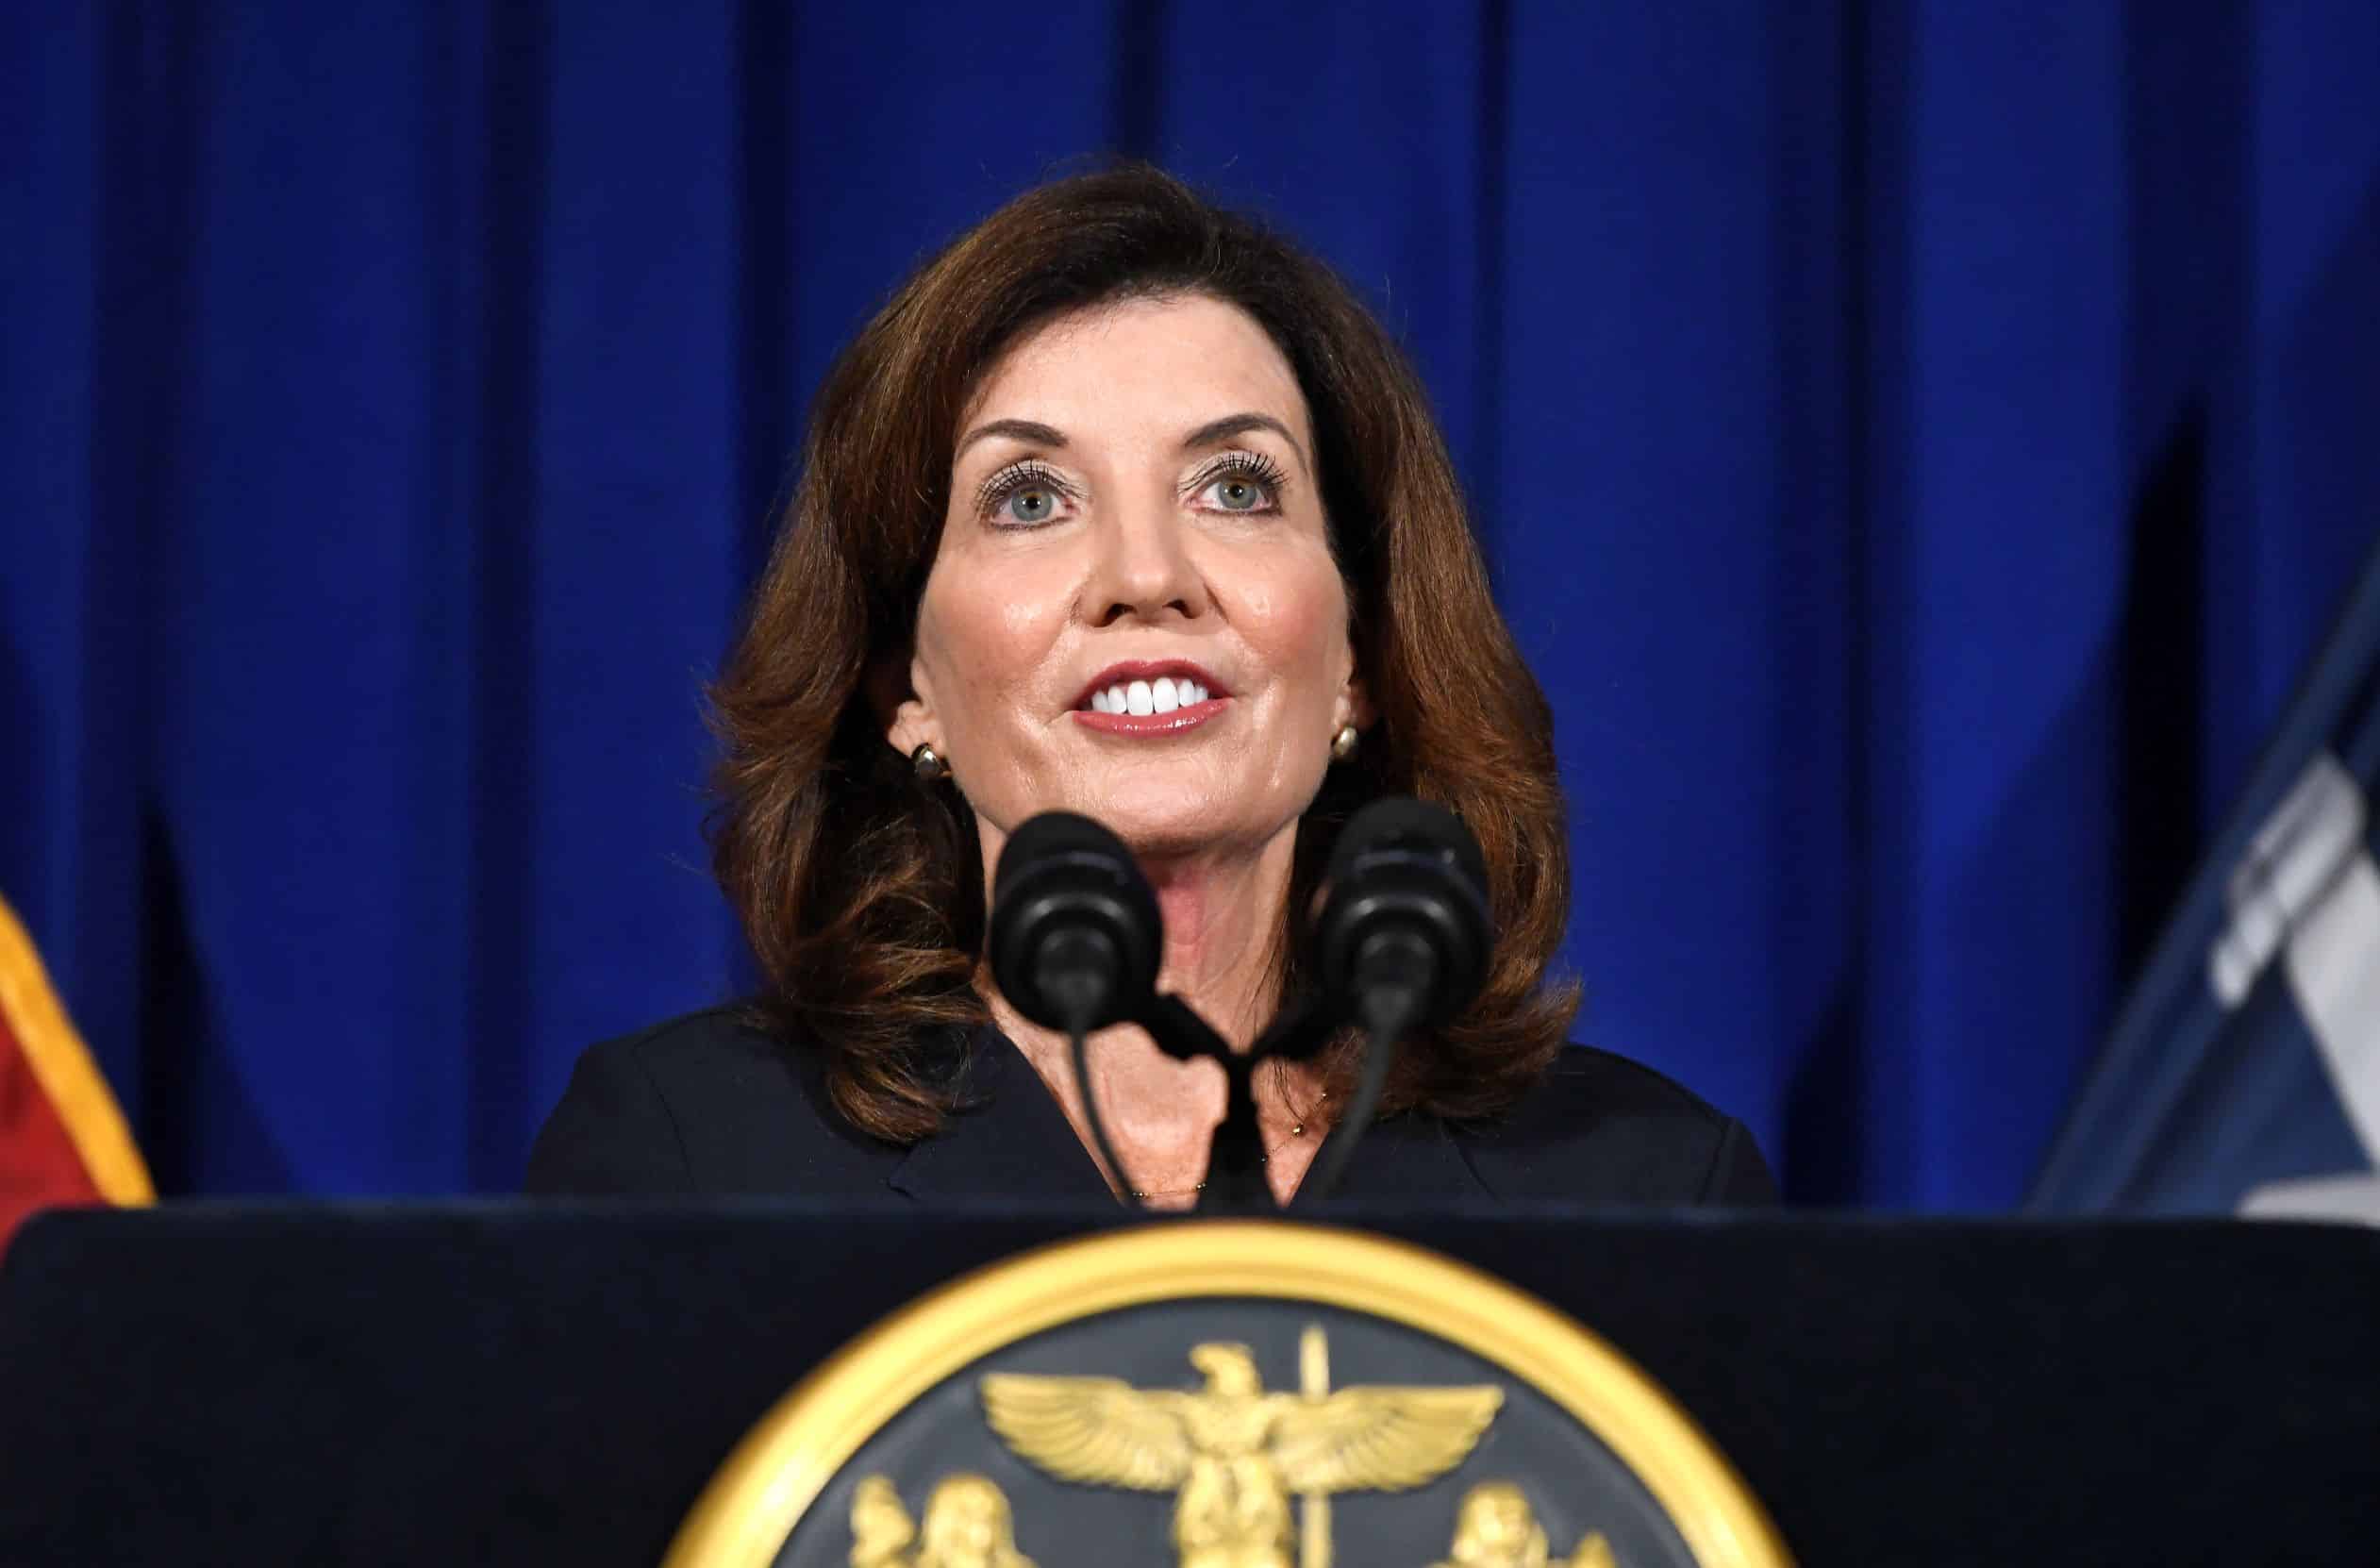 Hochul: I’ll Run for Governor After Finishing Cuomo’s Term